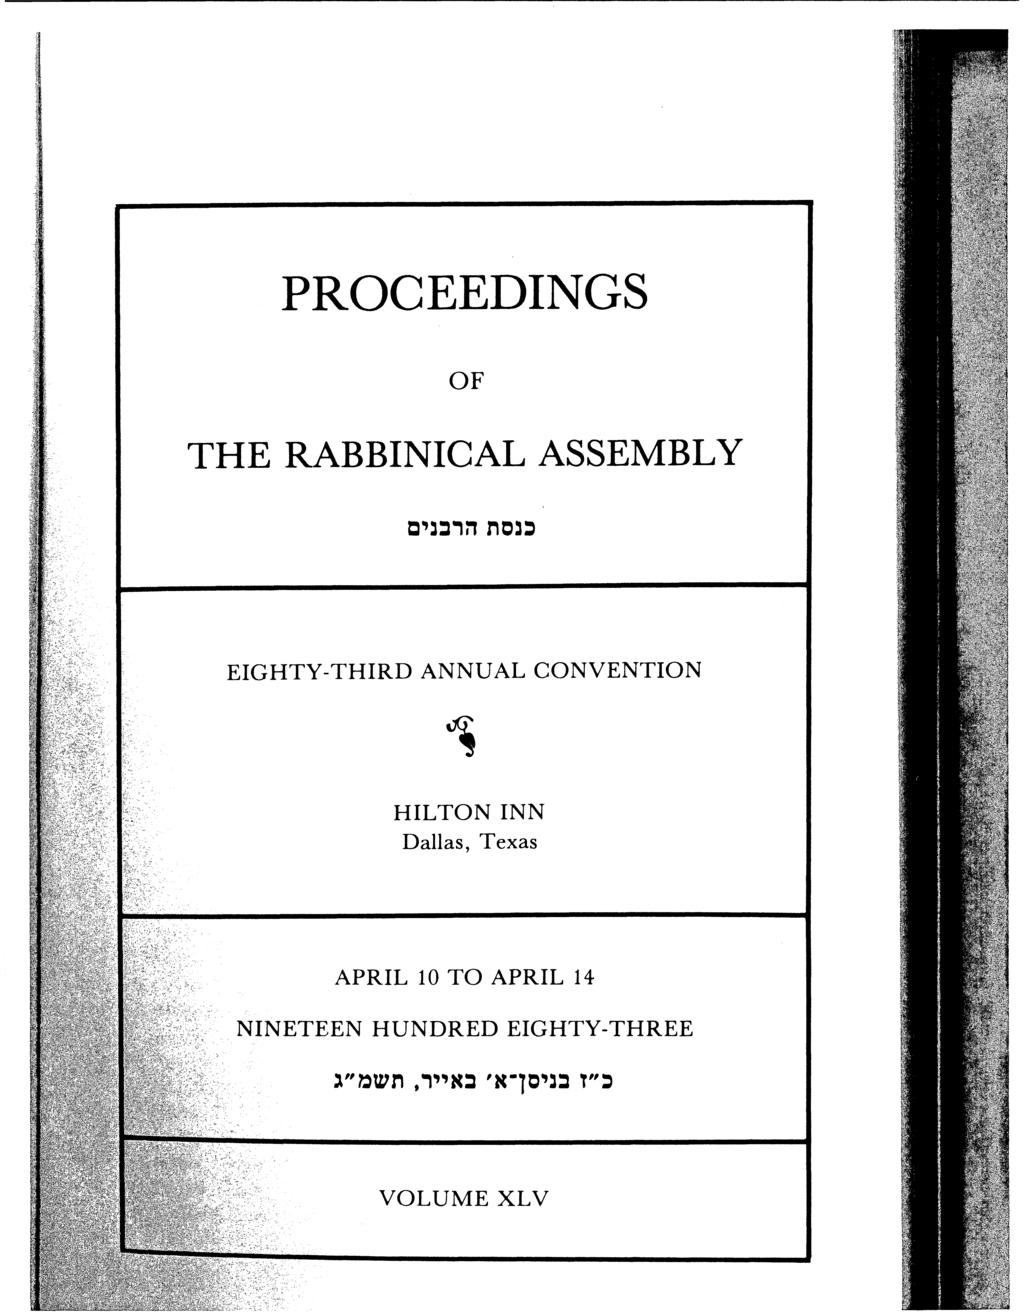 PROCEEDINGS OF THE RABBINICAL ASSEMBLY EIGHTY-THIRD ANNUAL CONVENTION HILTON